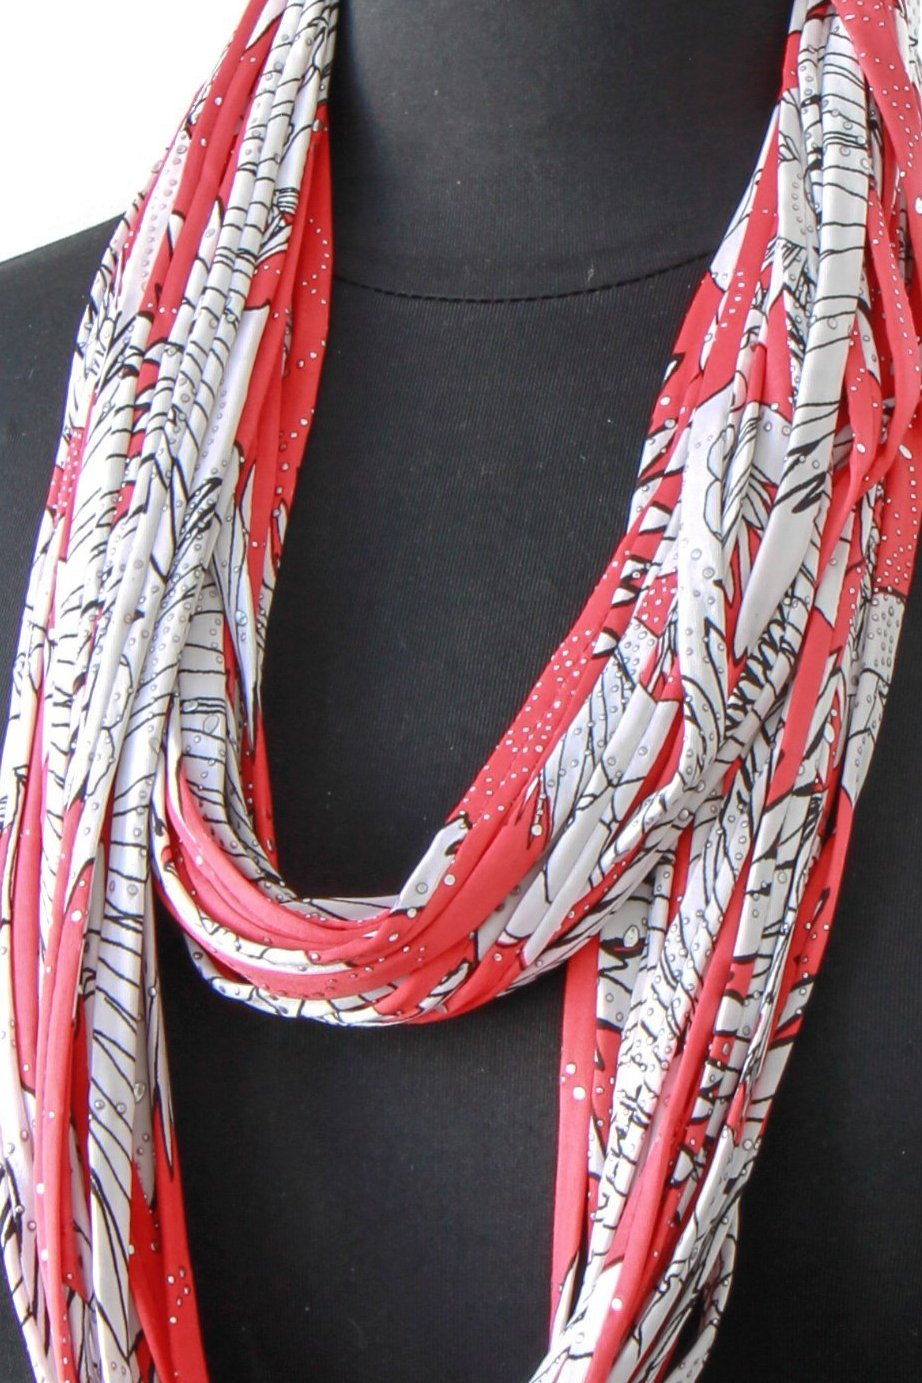 Red infinity Scarf in Poinsettia Print